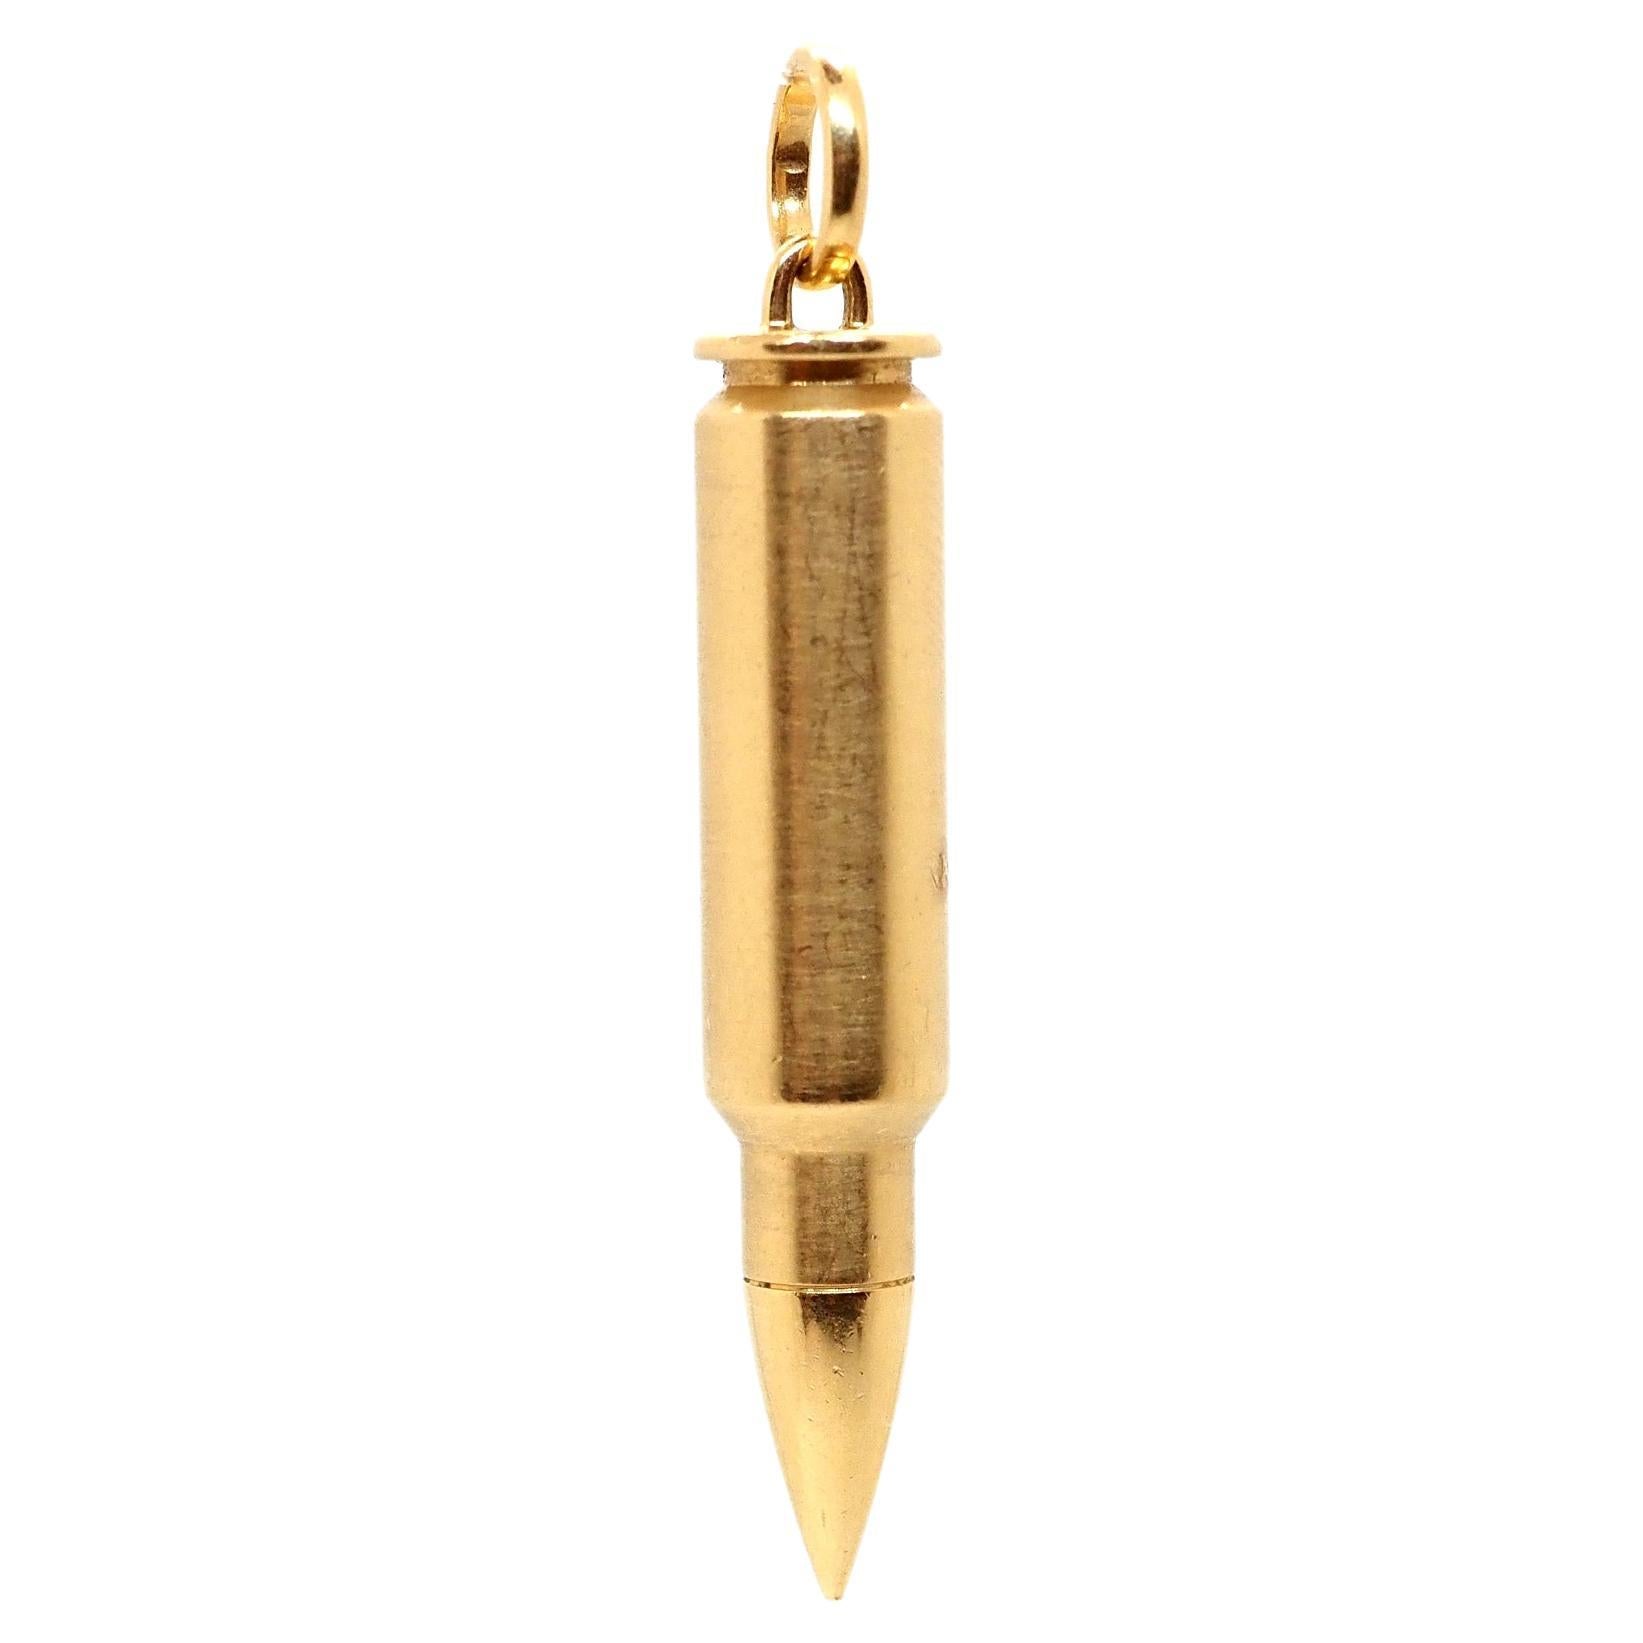 Introduce a touch of avant-garde elegance with this bullet-shaped 18k gold pendant, signed by the renowned brand Akillis Paris.

This is a term of contemporary and attractive creation. The bullet shape exudes a sense of power and strength, while the